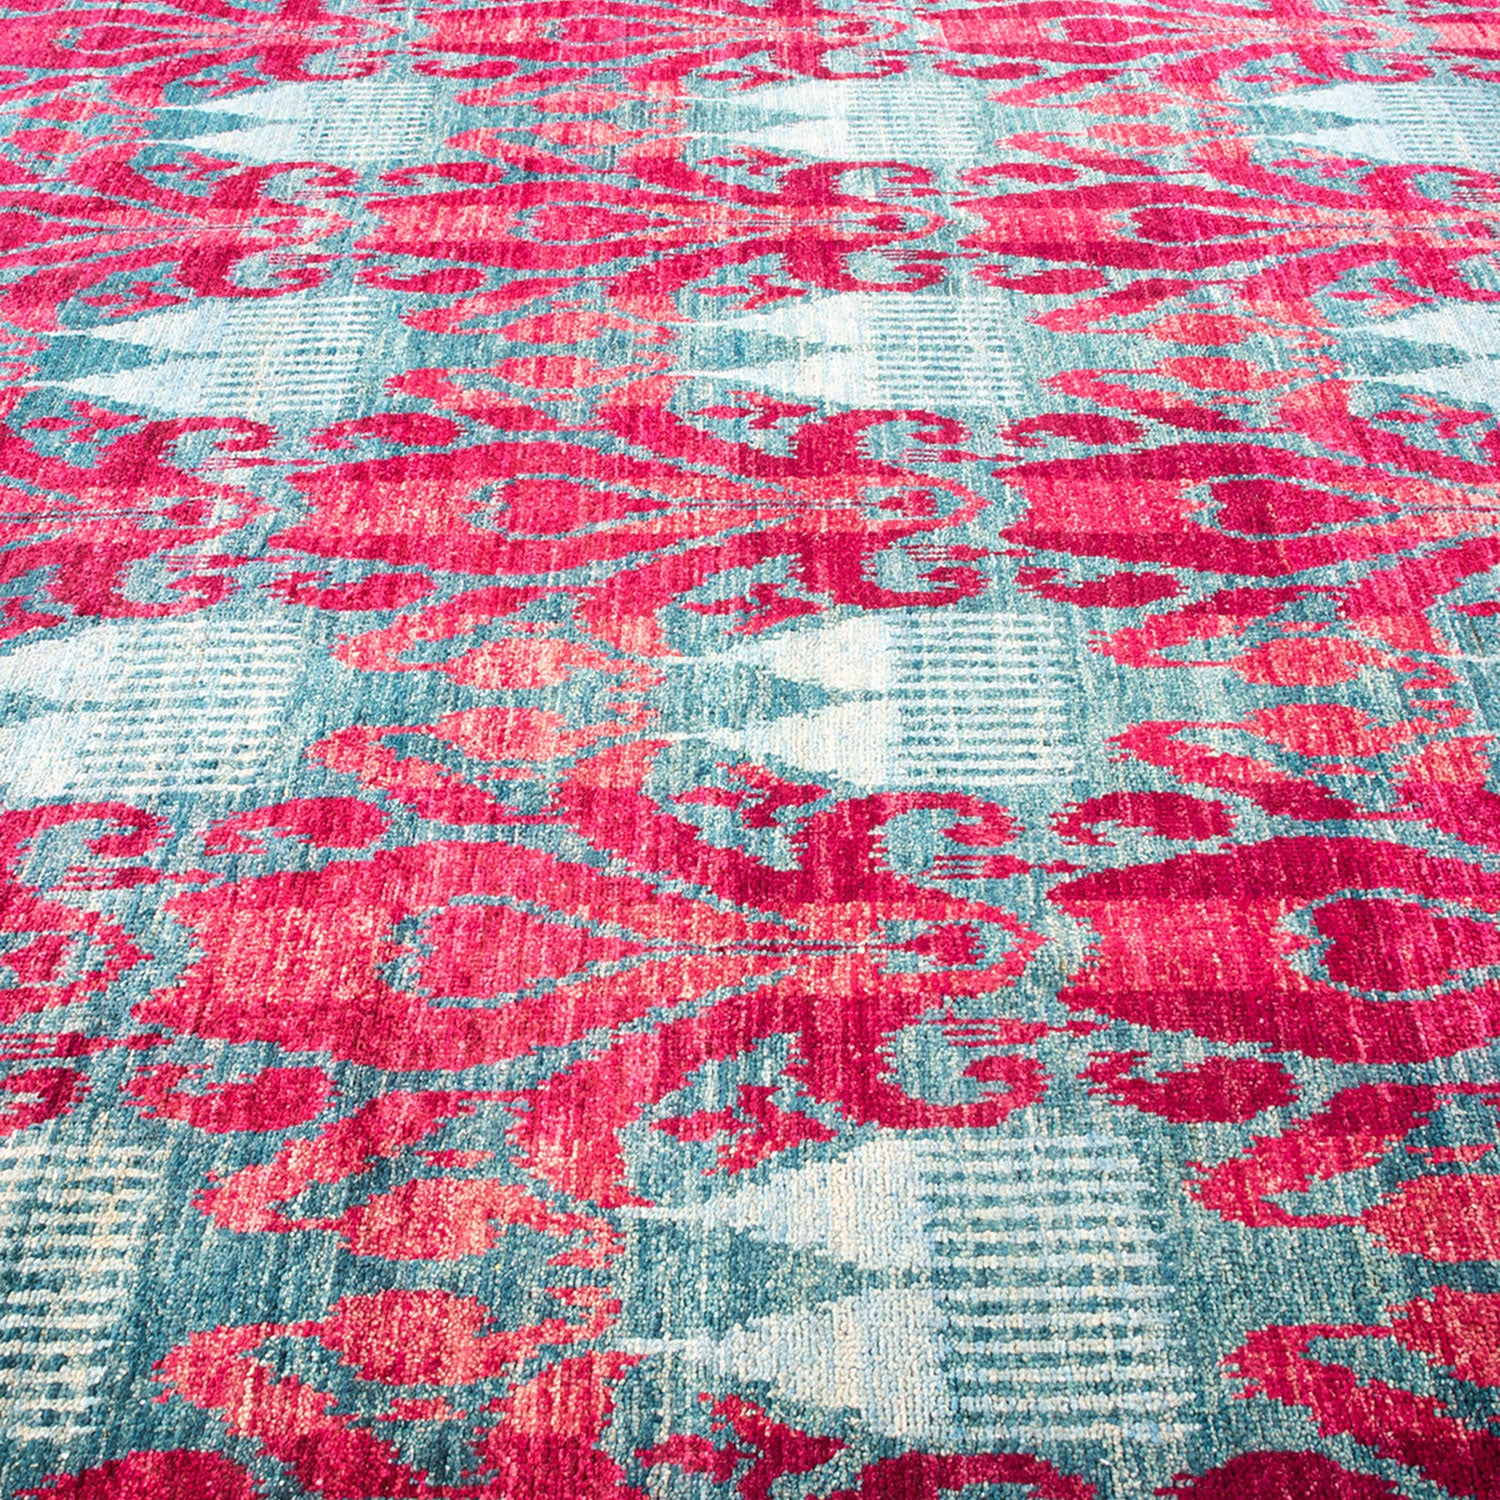 Vibrant vintage rug with ornate pattern adds bold character